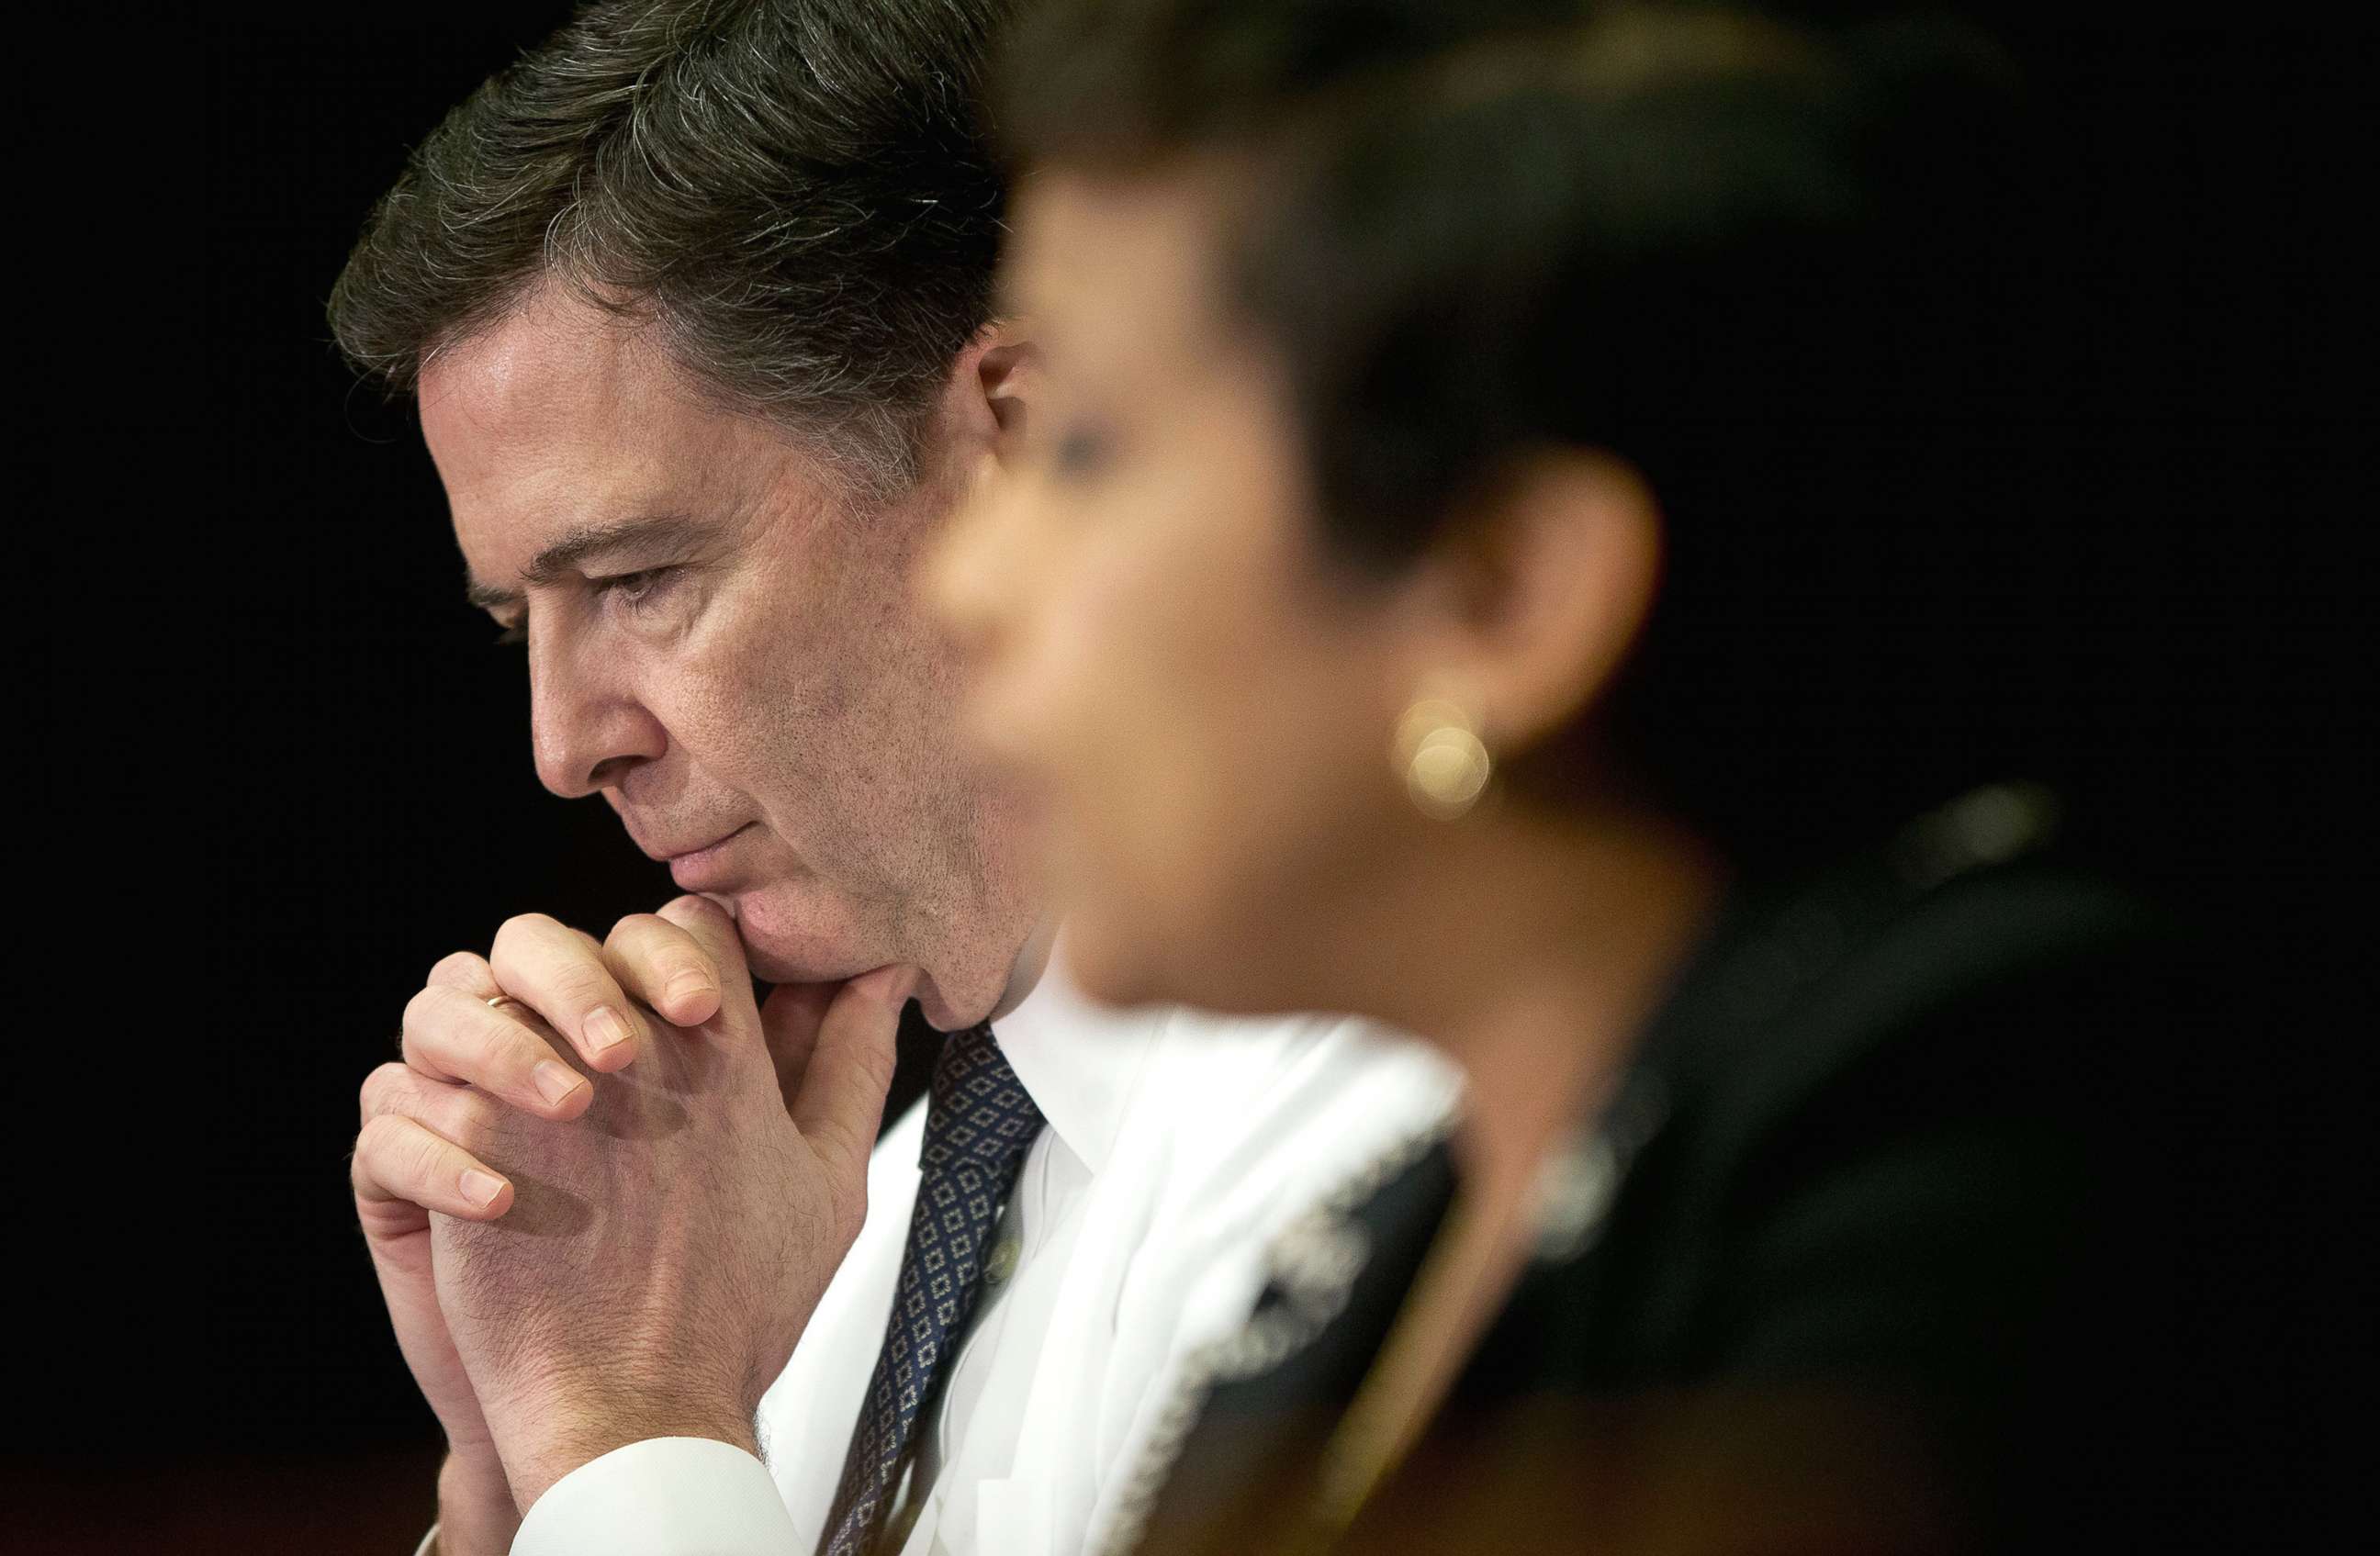 PHOTO: FBI Director James Comey listens at left as Attorney General Loretta Lynch speaks during a meeting with members of the media at Justice Department in Washington, D.C., Nov. 19, 2015.